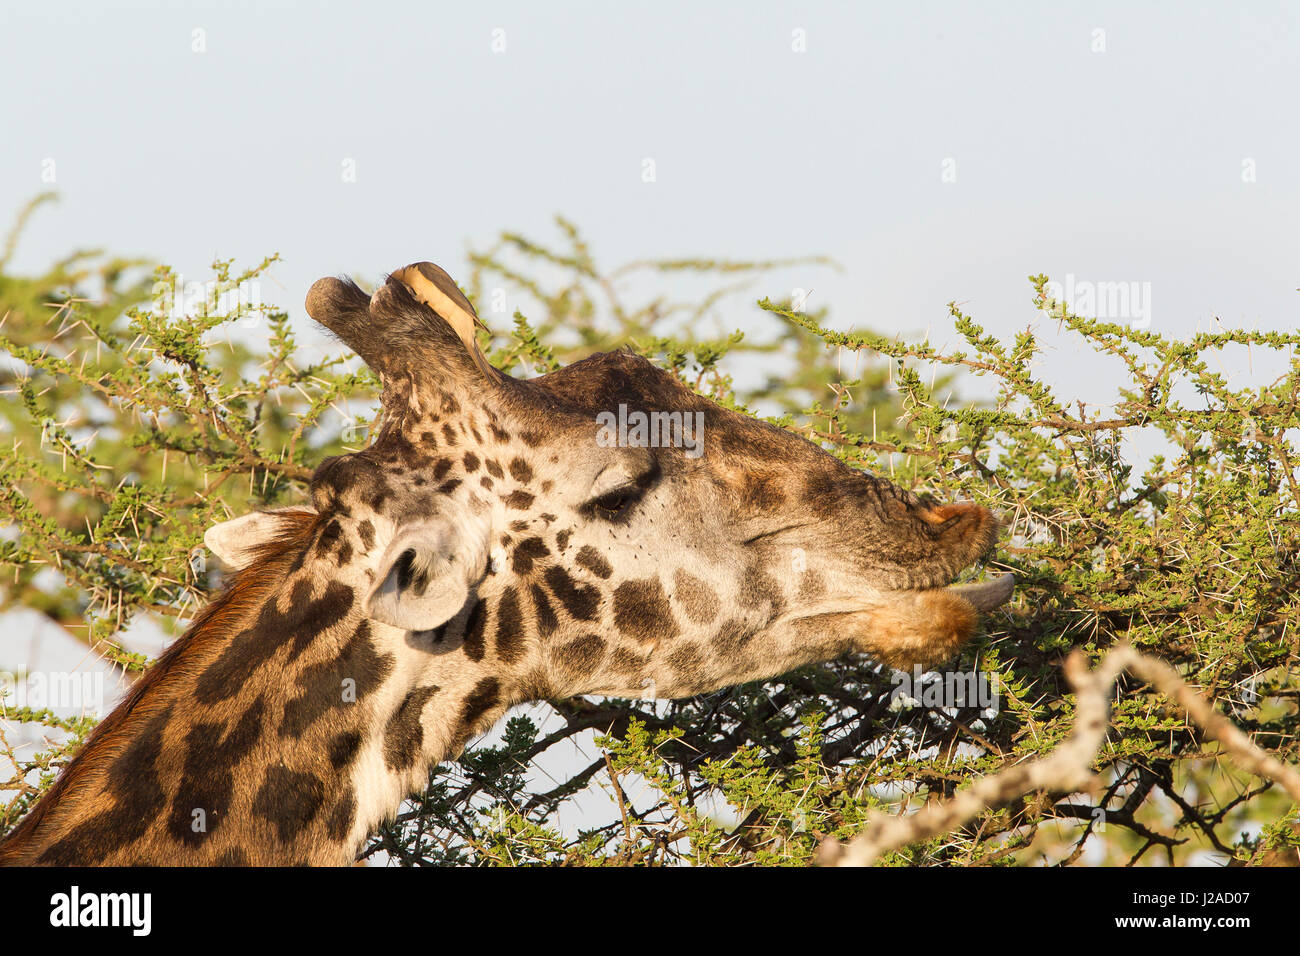 Adult male Masai giraffe eats acacia tree leaves, using its tongue to draw the leaves and thorns into its open lips, ox-pecker bird cleaning the horn on its head Stock Photo